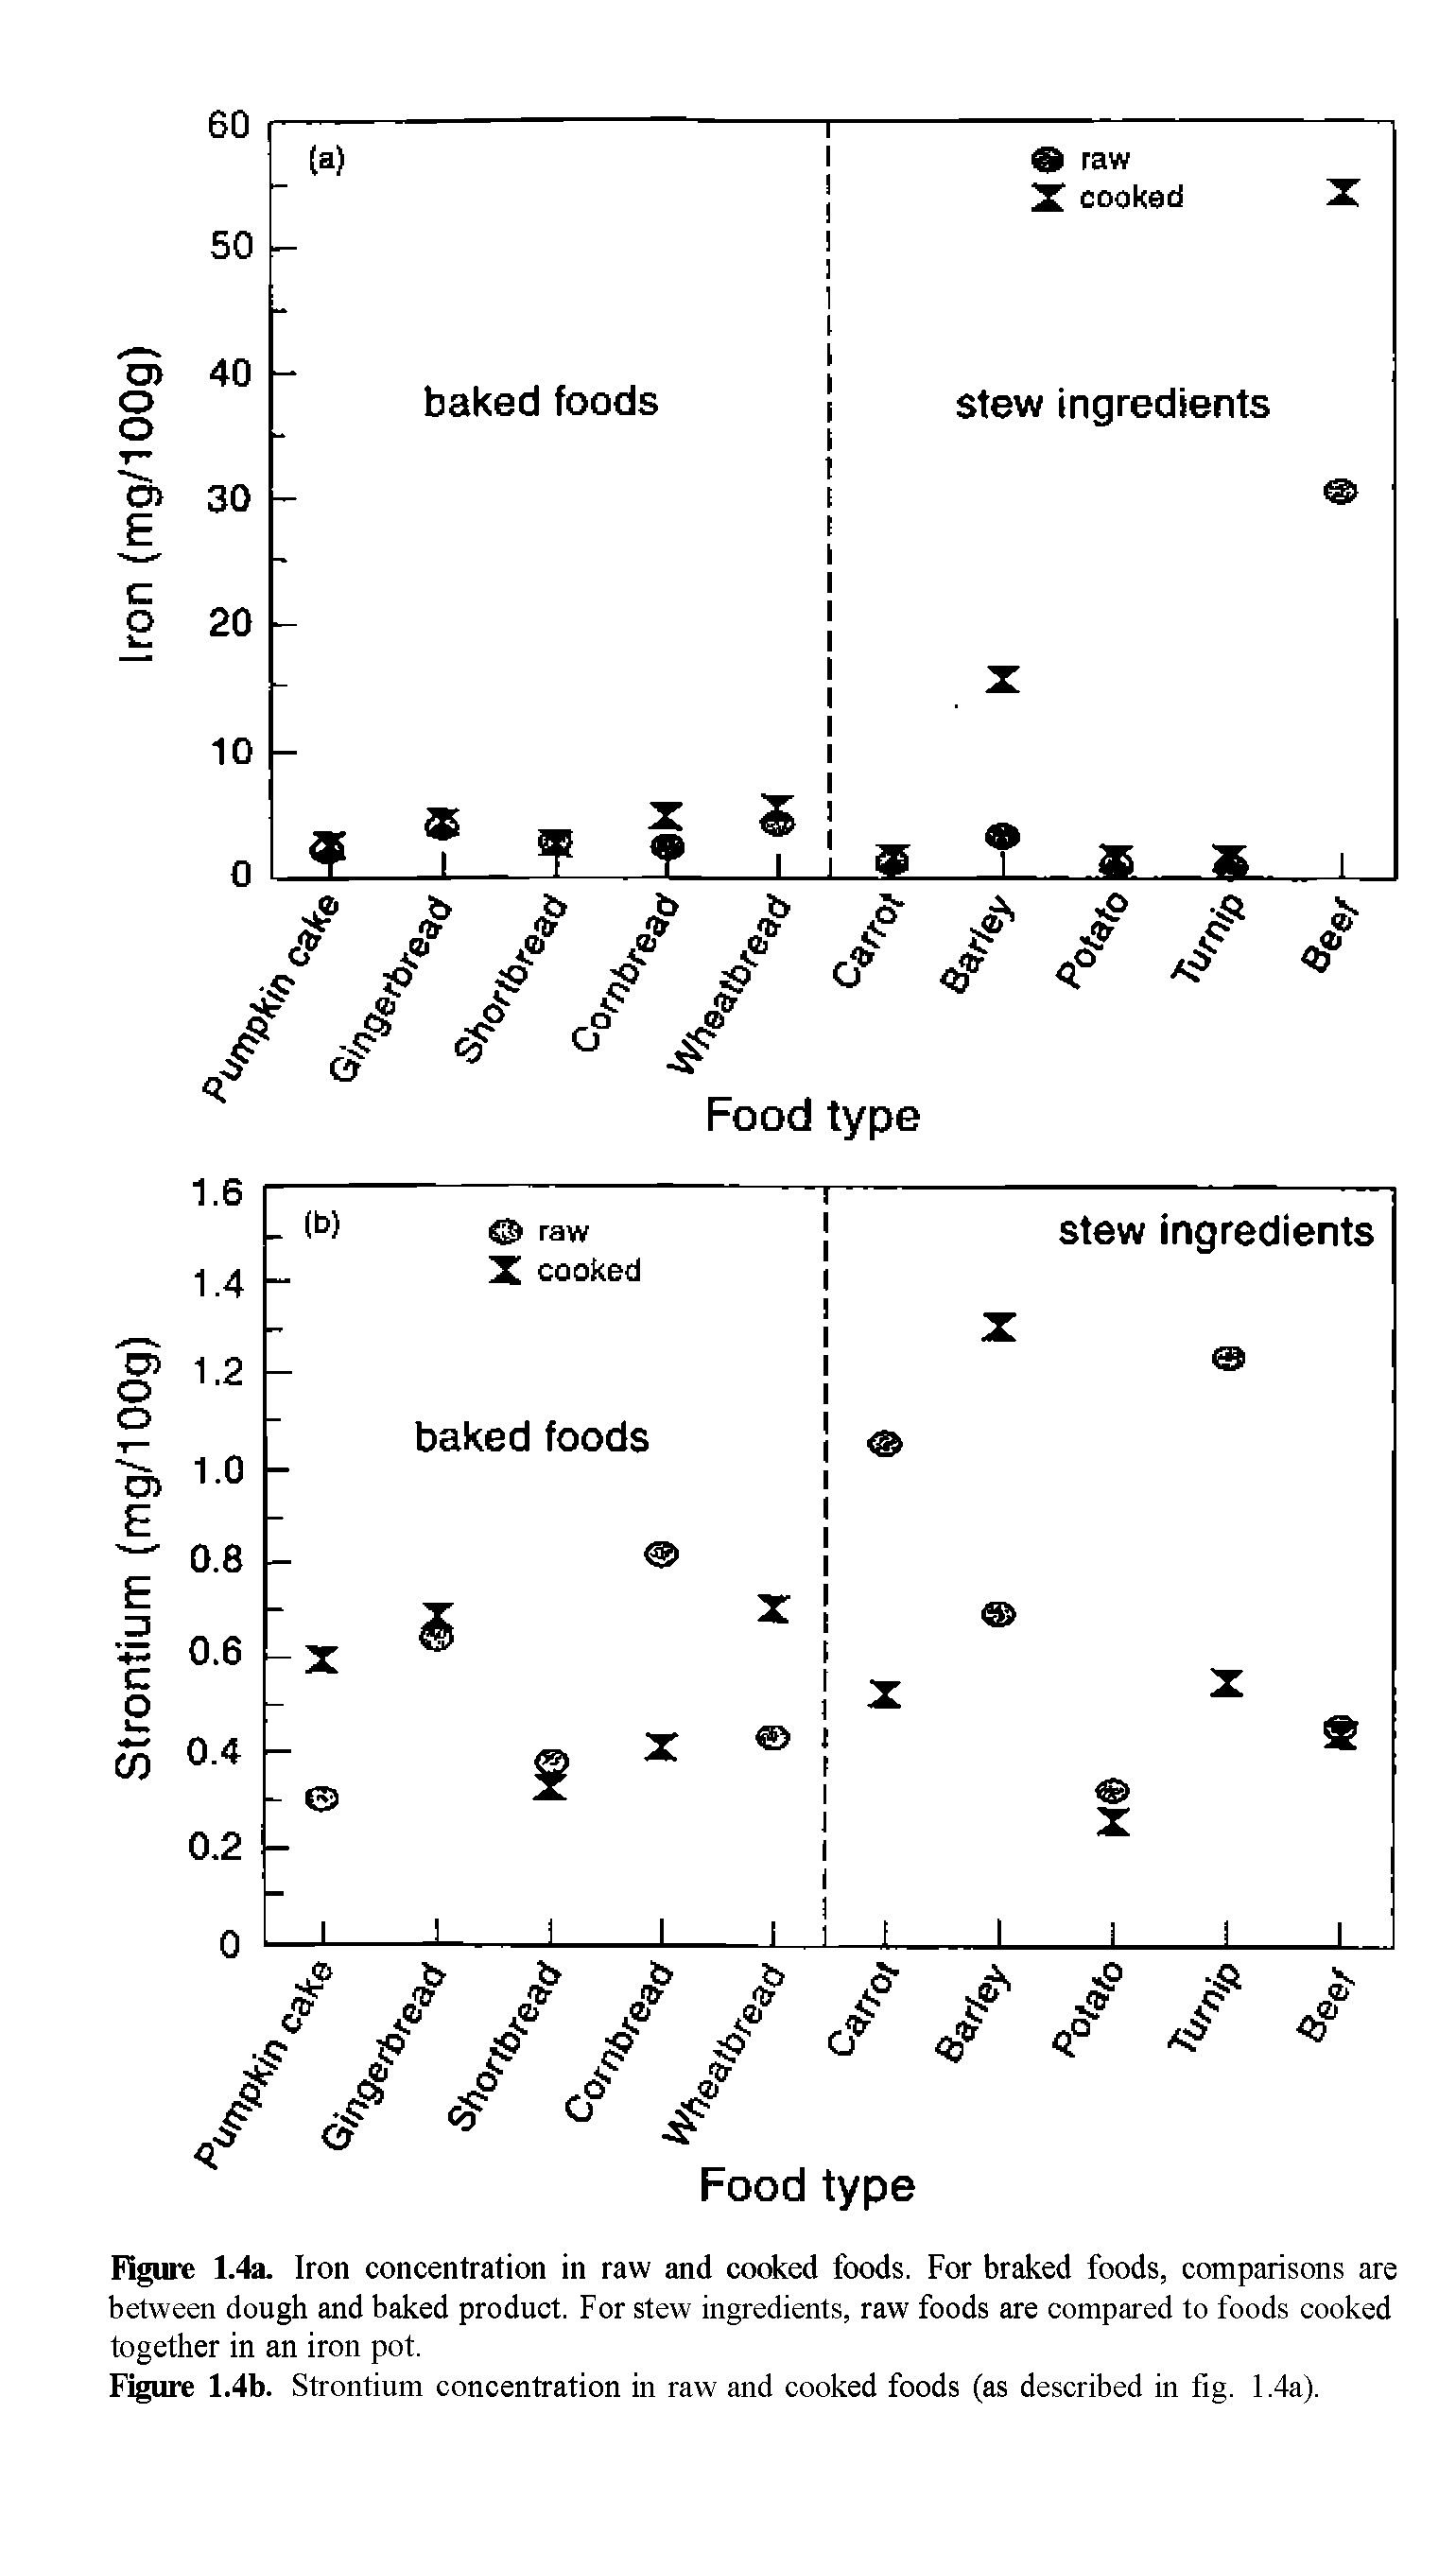 Figure 1.4a. Iron concentration in raw and cooked foods. For braked foods, comparisons are between dough and baked product. For stew ingredients, raw foods are compared to foods cooked together in an iron pot.